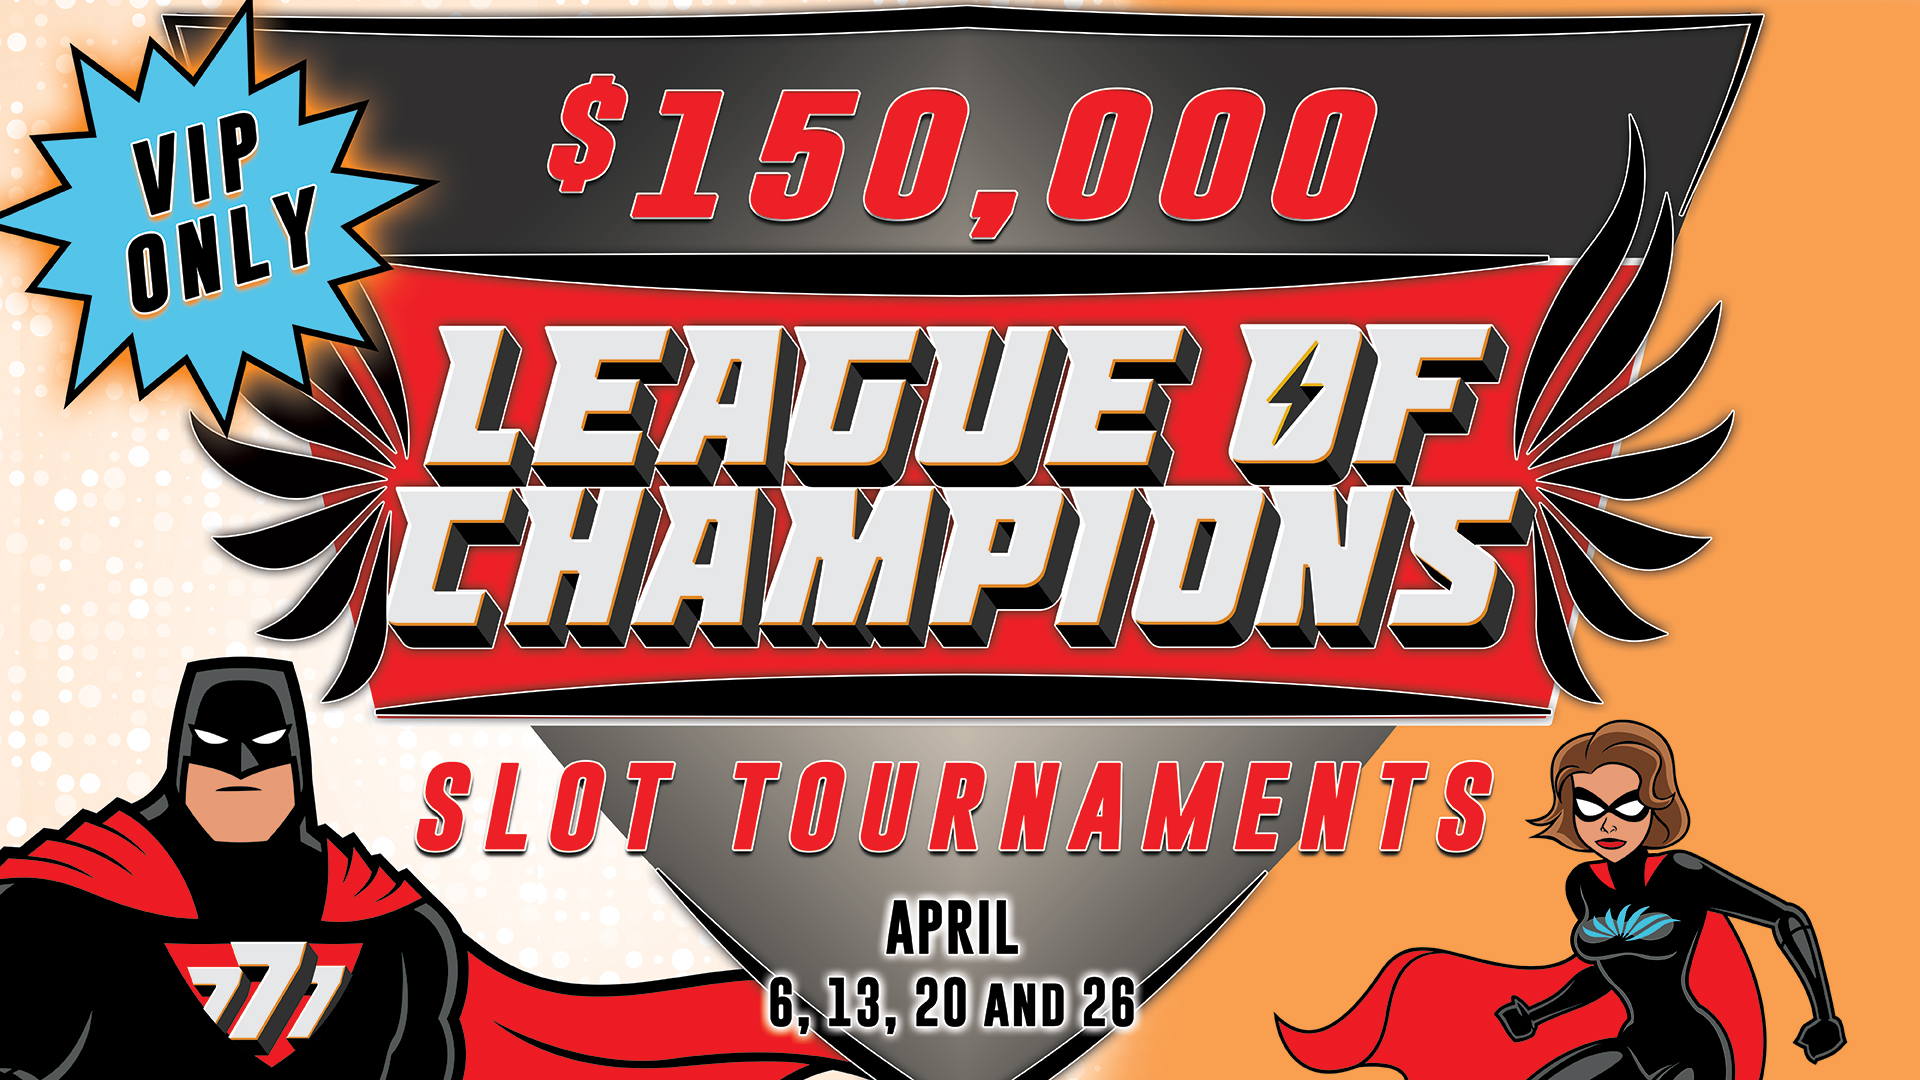 Play League Of Champions VIP Slot Tournament At Seven Feathers Casino Resort